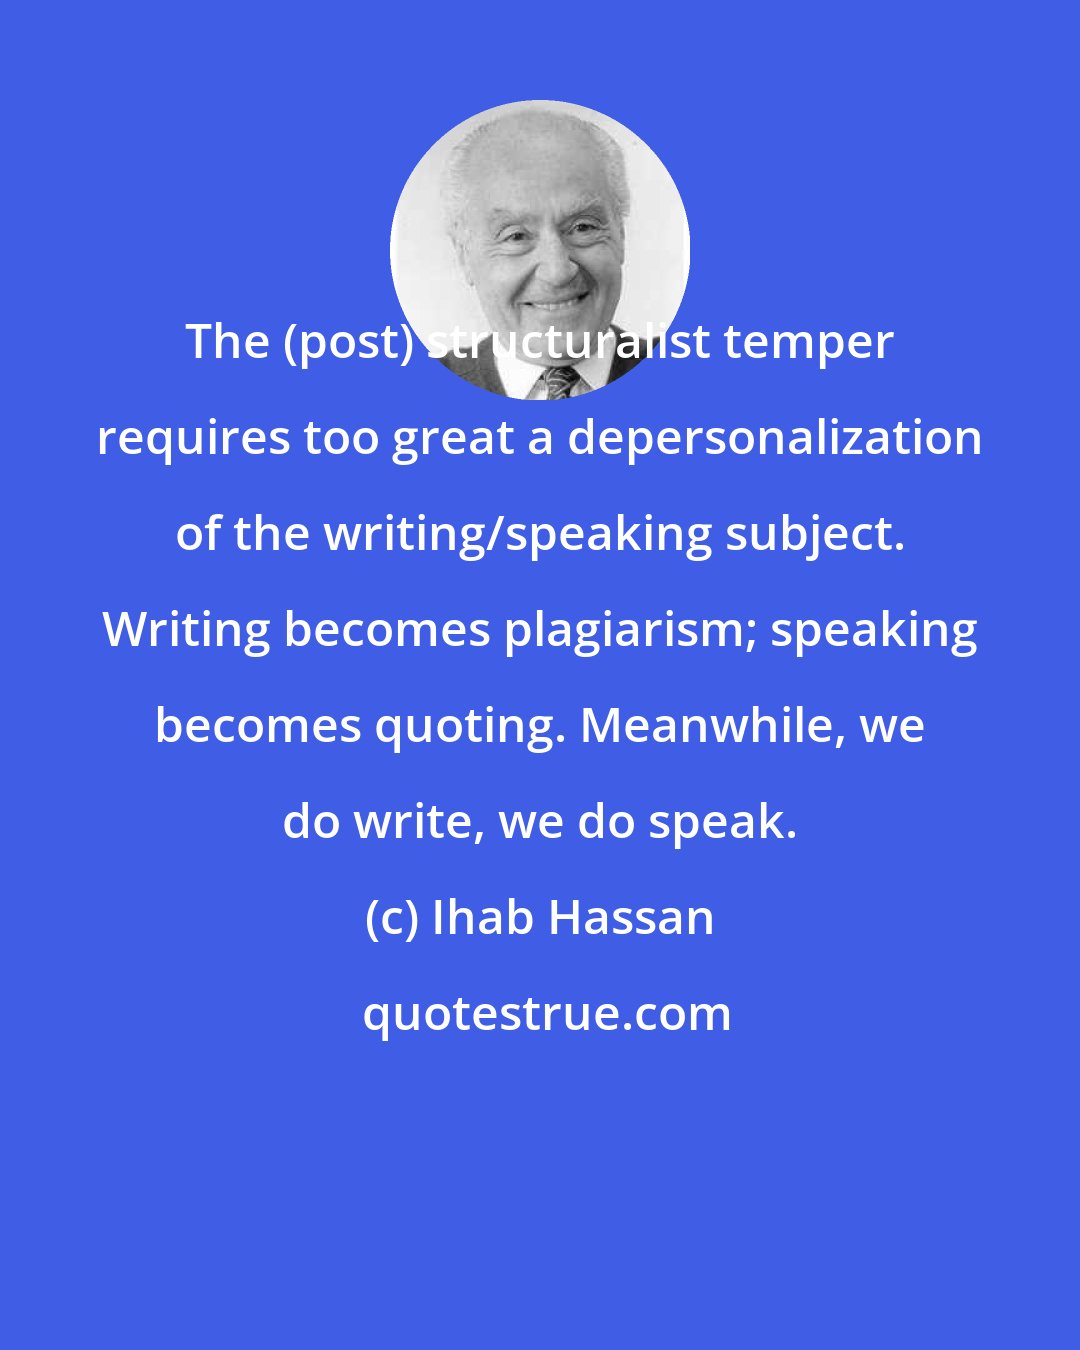 Ihab Hassan: The (post) structuralist temper requires too great a depersonalization of the writing/speaking subject. Writing becomes plagiarism; speaking becomes quoting. Meanwhile, we do write, we do speak.